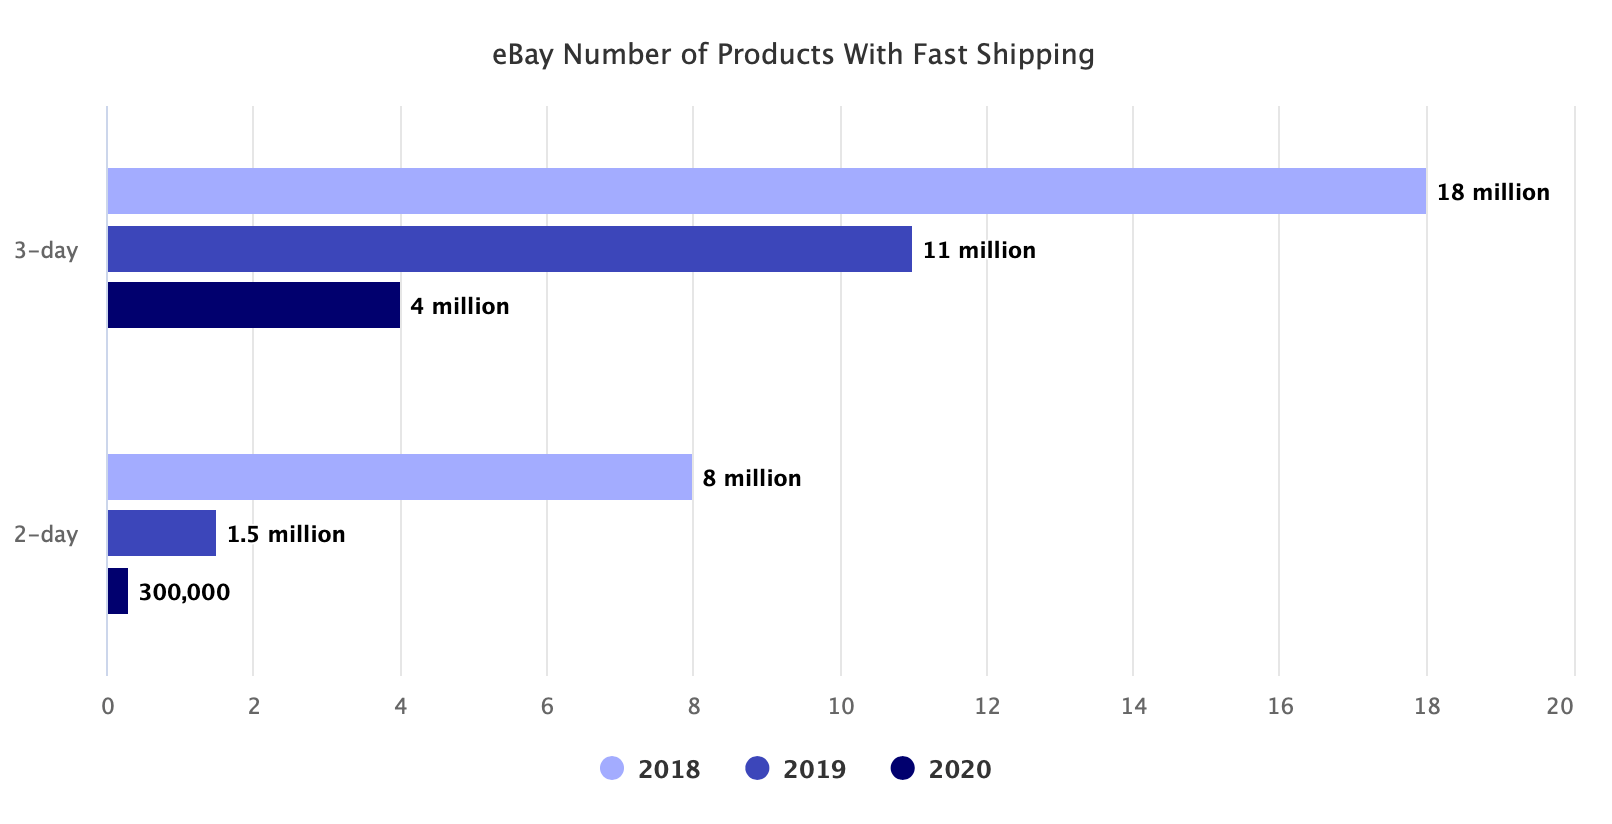 eBay Number of Products With Fast Shipping